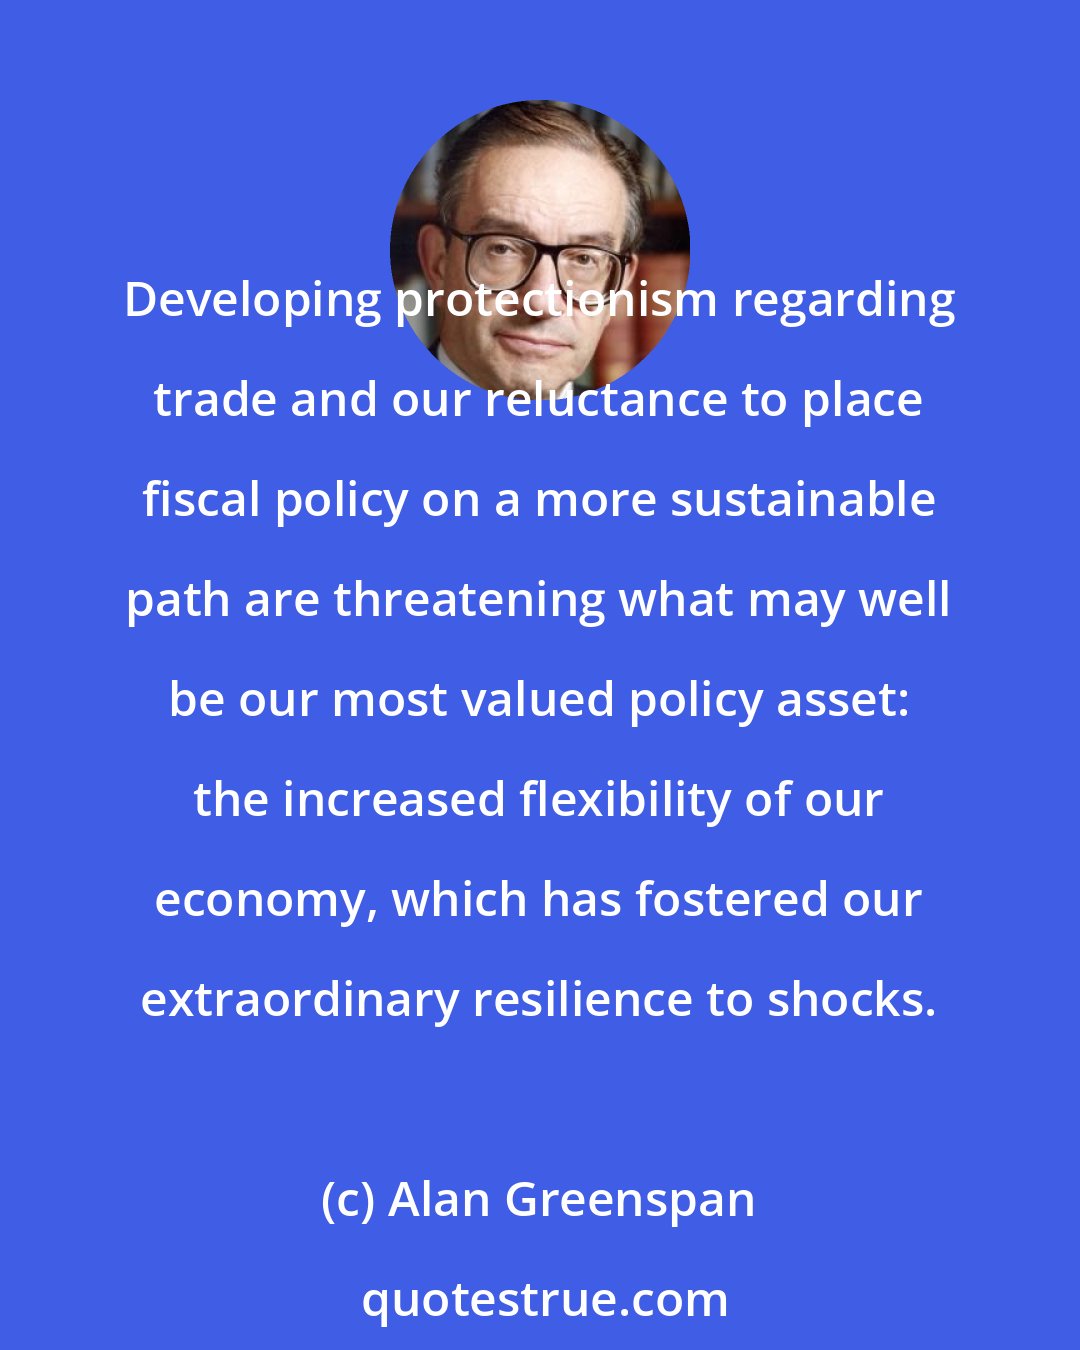 Alan Greenspan: Developing protectionism regarding trade and our reluctance to place fiscal policy on a more sustainable path are threatening what may well be our most valued policy asset: the increased flexibility of our economy, which has fostered our extraordinary resilience to shocks.